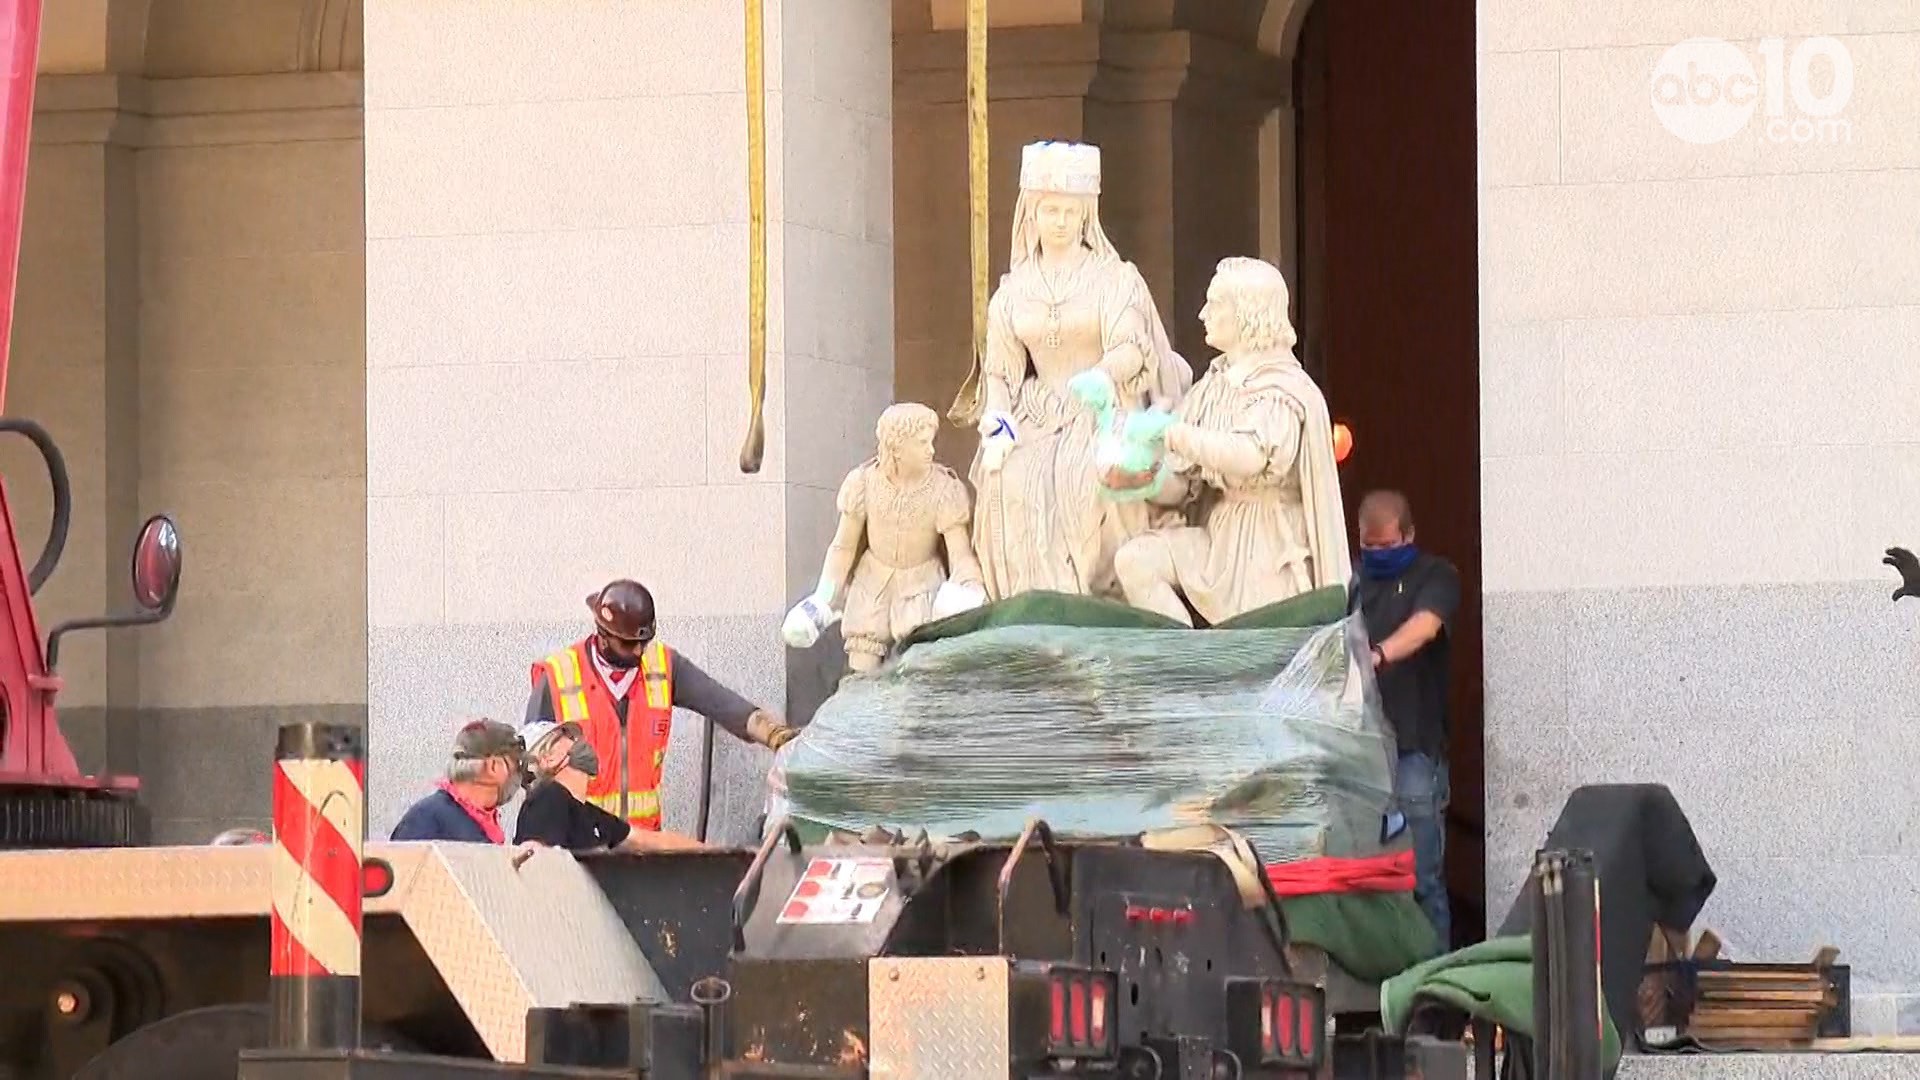 The Christopher Columbus and Junipero Serra statues were removed from the Capitol over the last few days and the John Sutter statue was removed a few weeks ago.